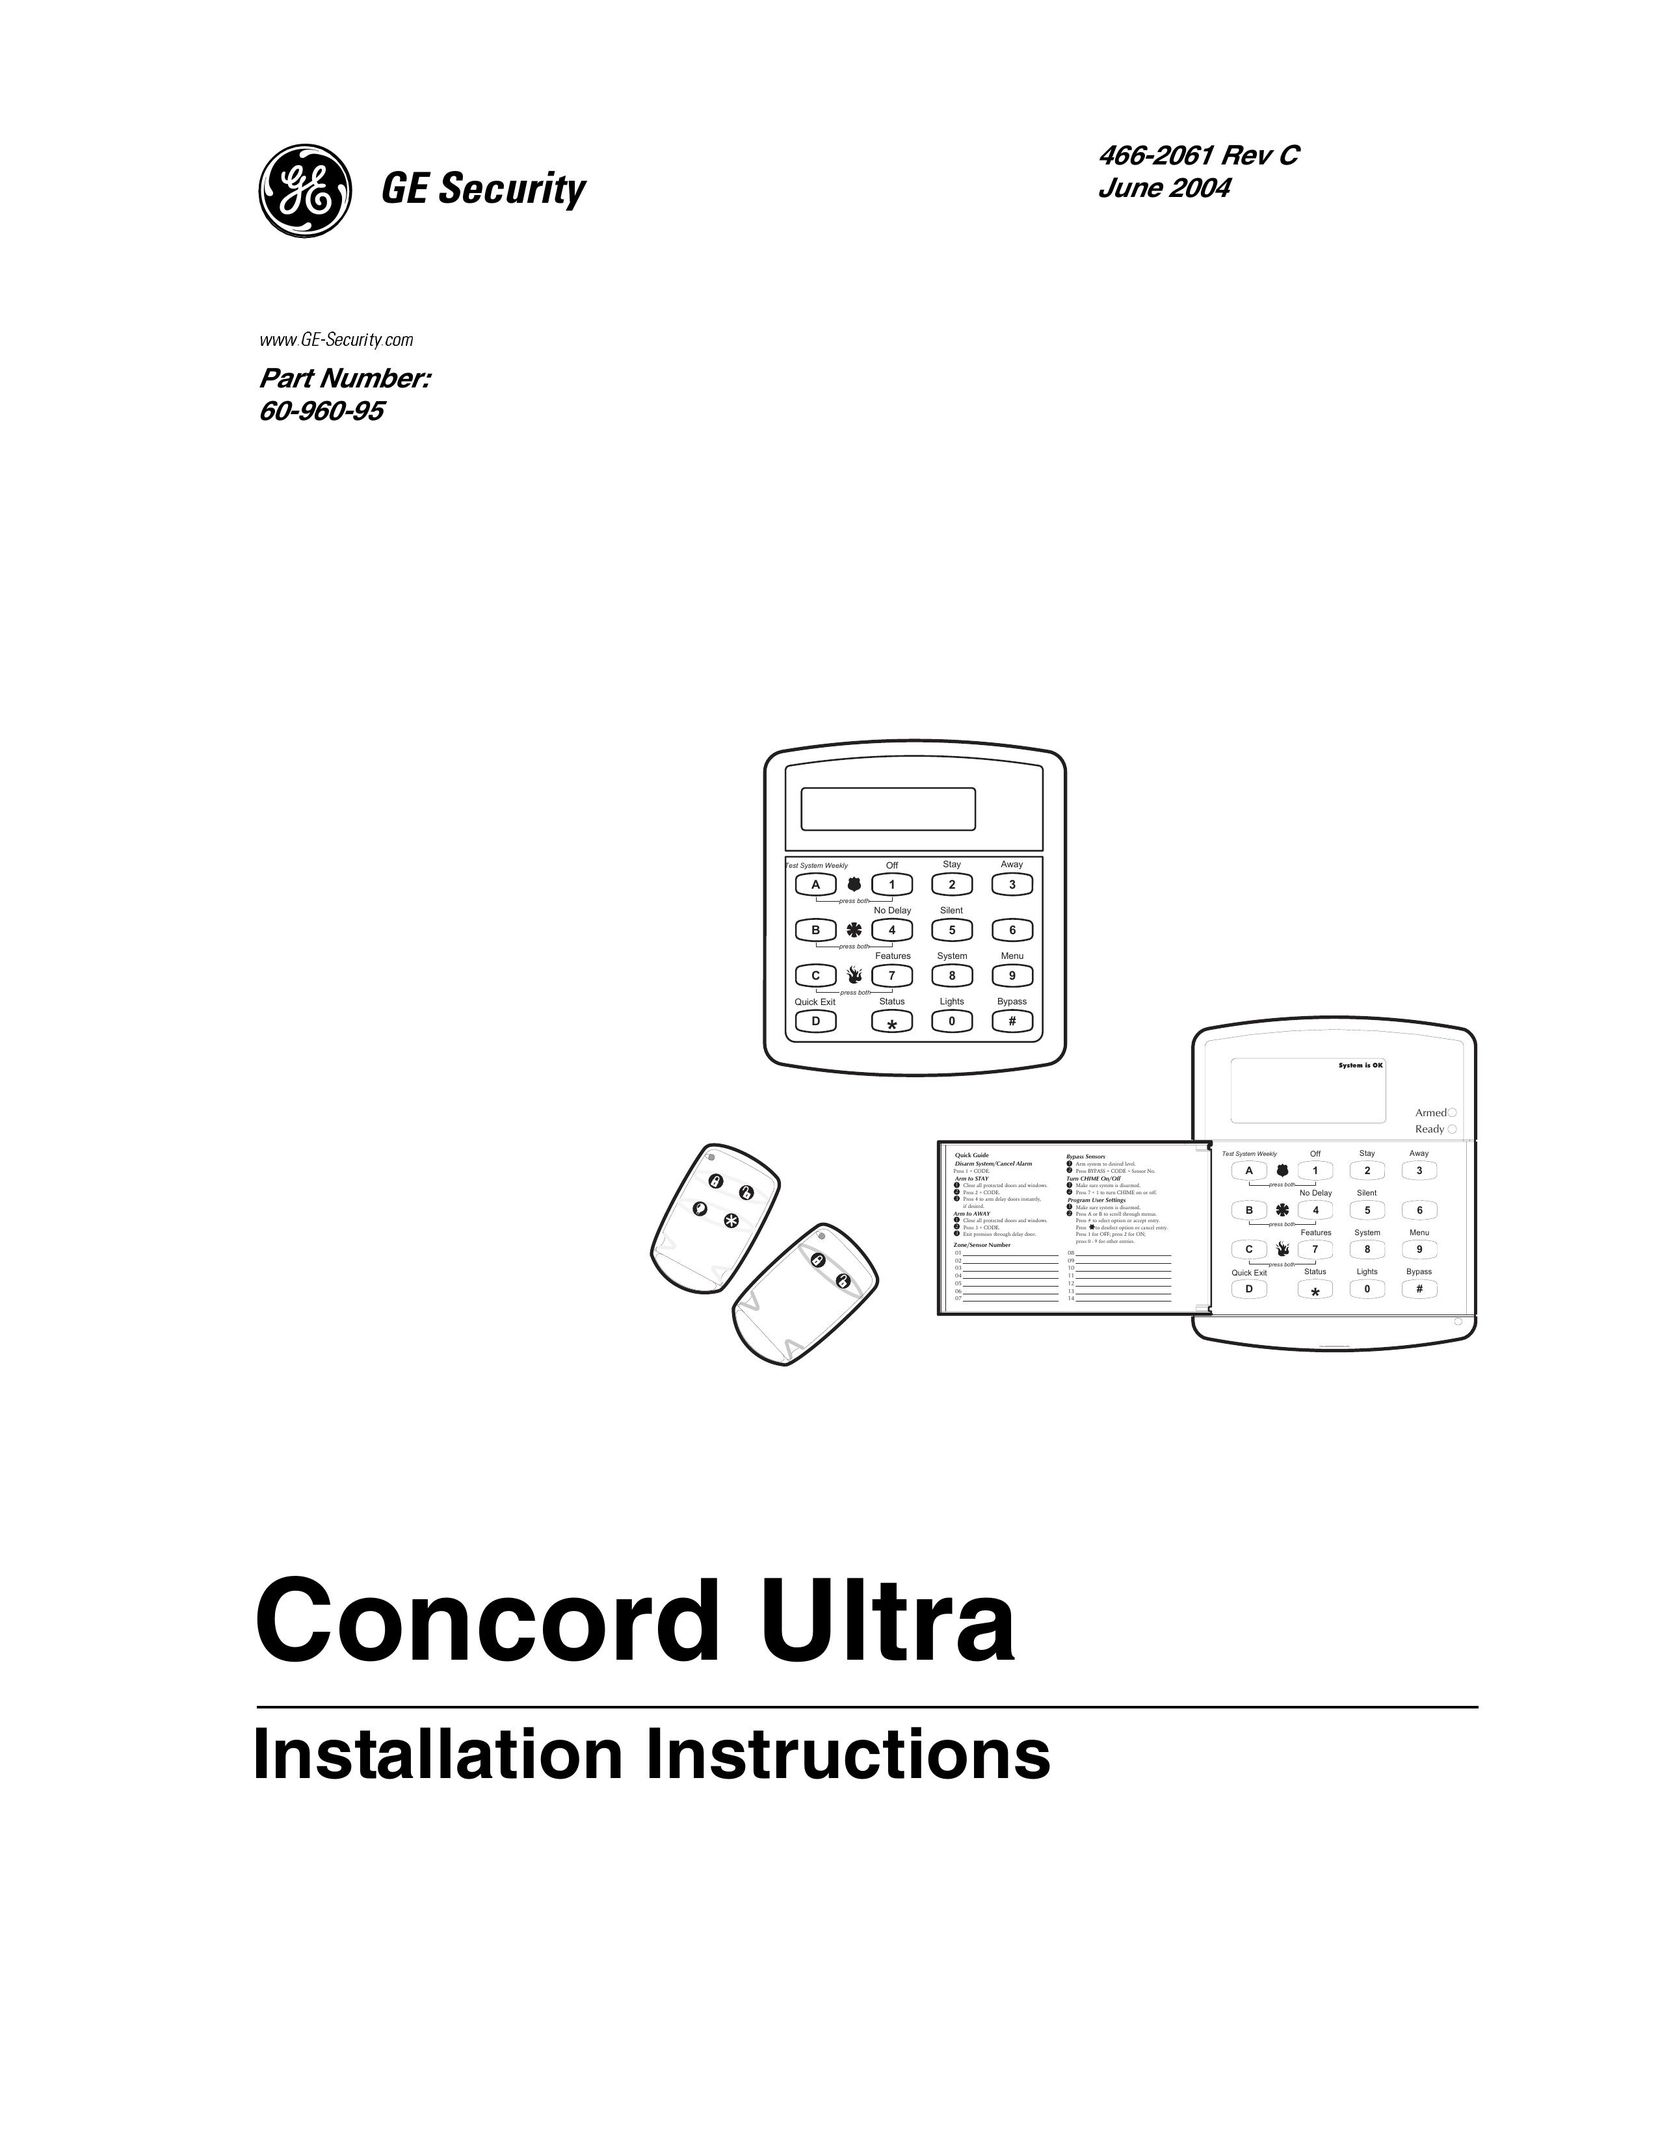 GE 60-960-95 Home Security System User Manual